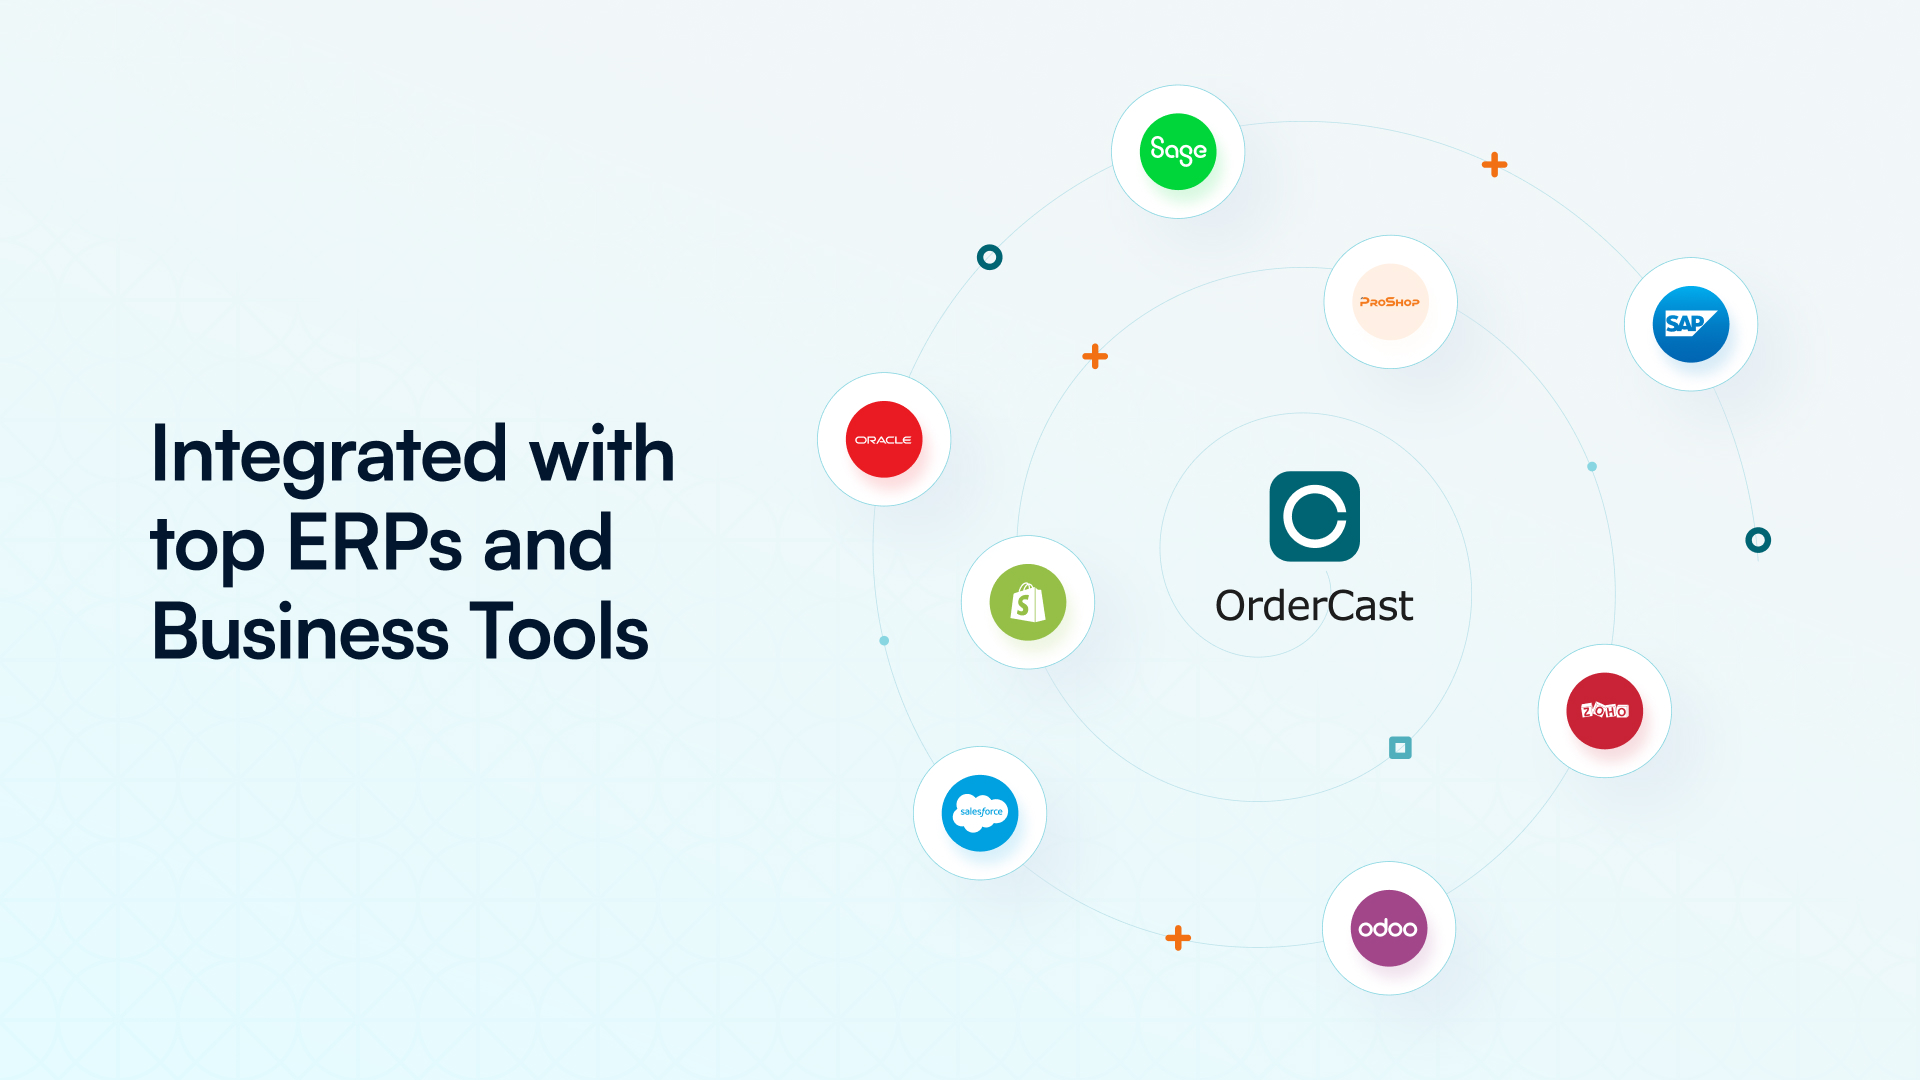 Integrations with ERPs and Business Tools by OrderCast